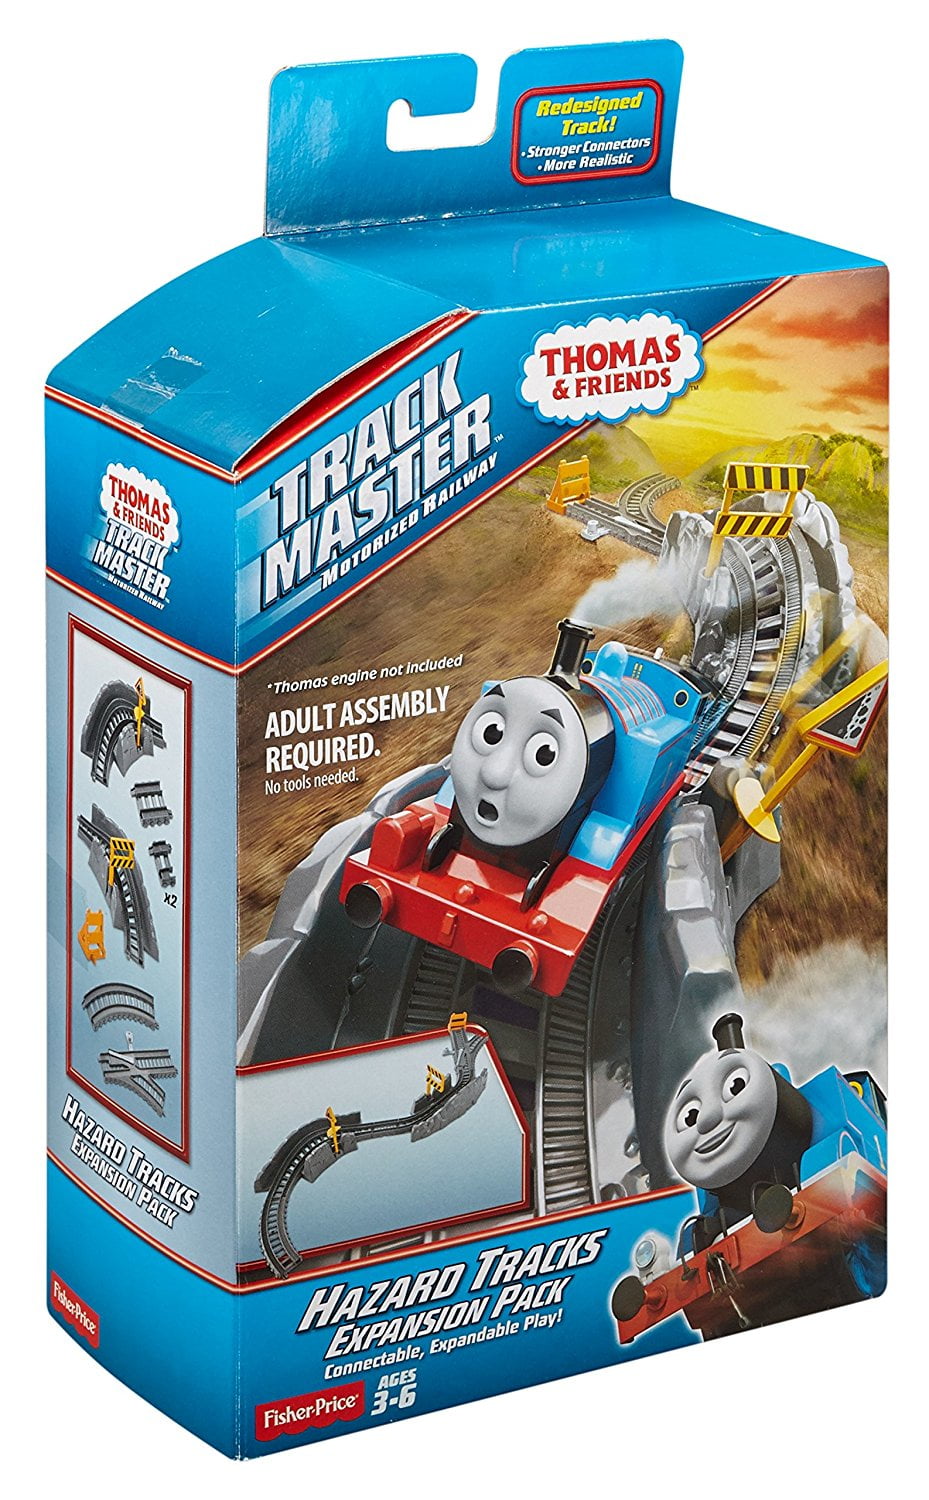 Fisher-Price Thomas & Friends TrackMaster HAZARD TRACKS Expansion Pack 